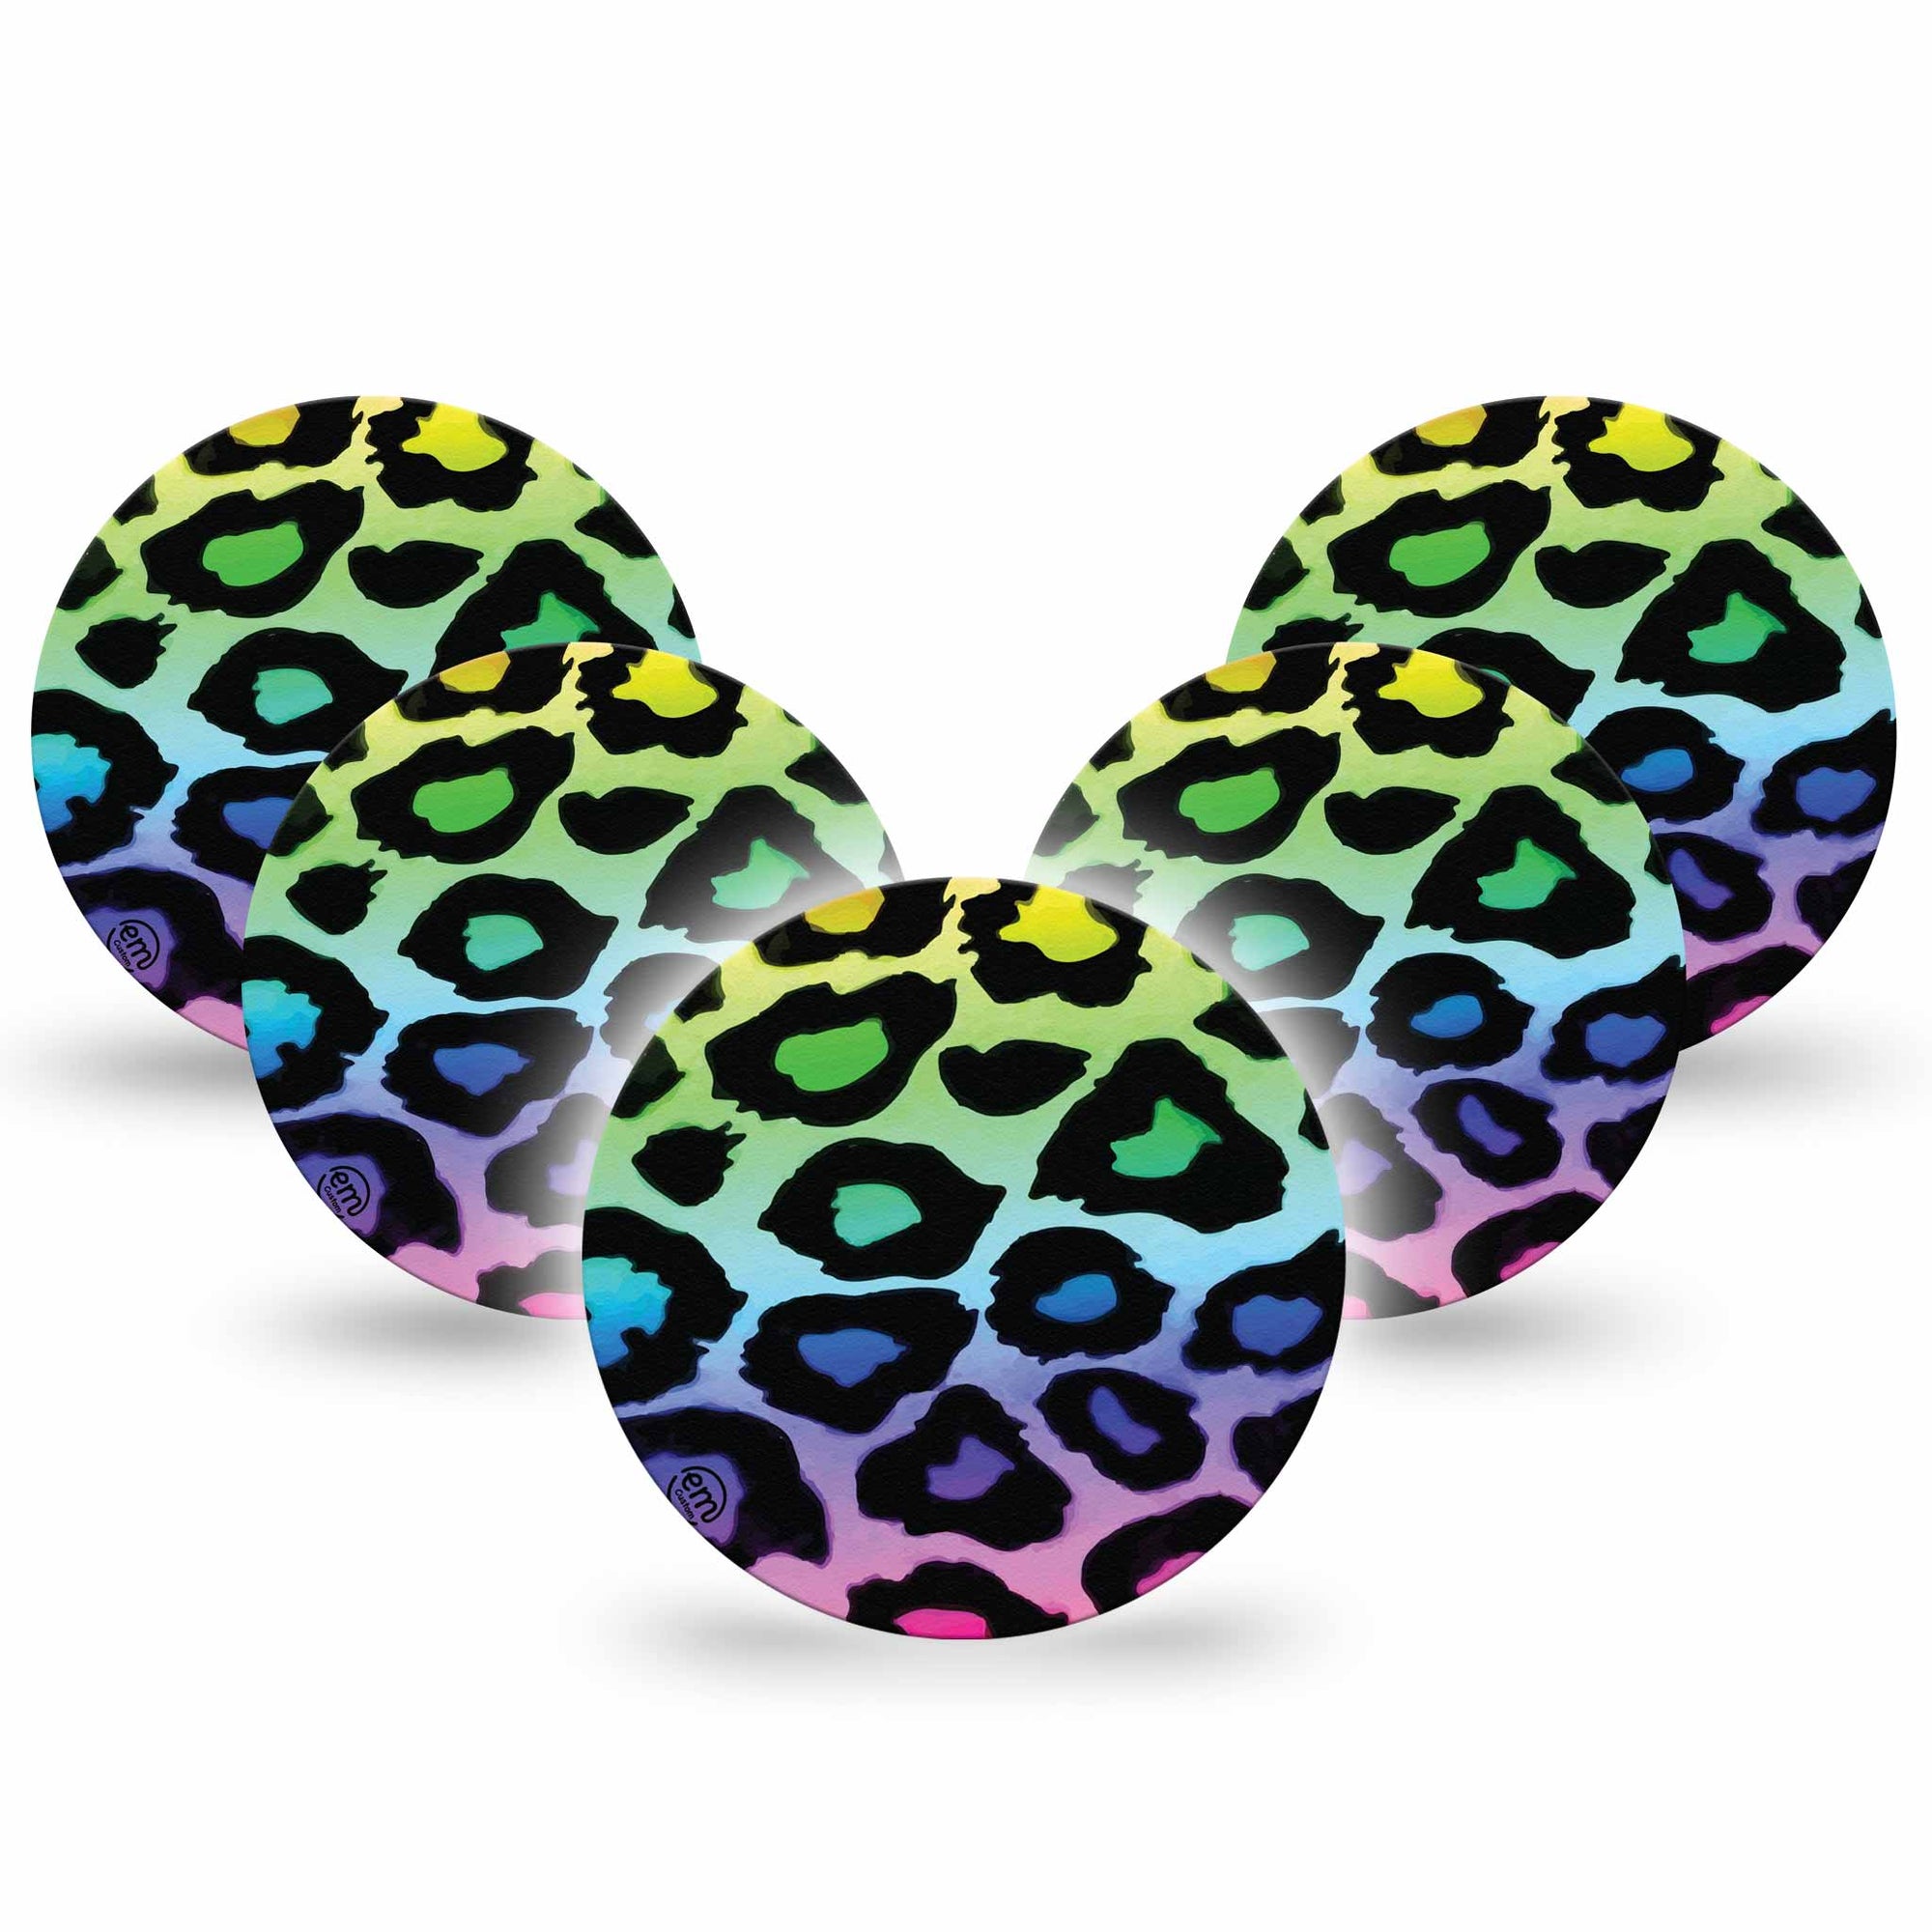 ExpressionMed Multicolored Cheetah Print Libre Overpatch 5-pack